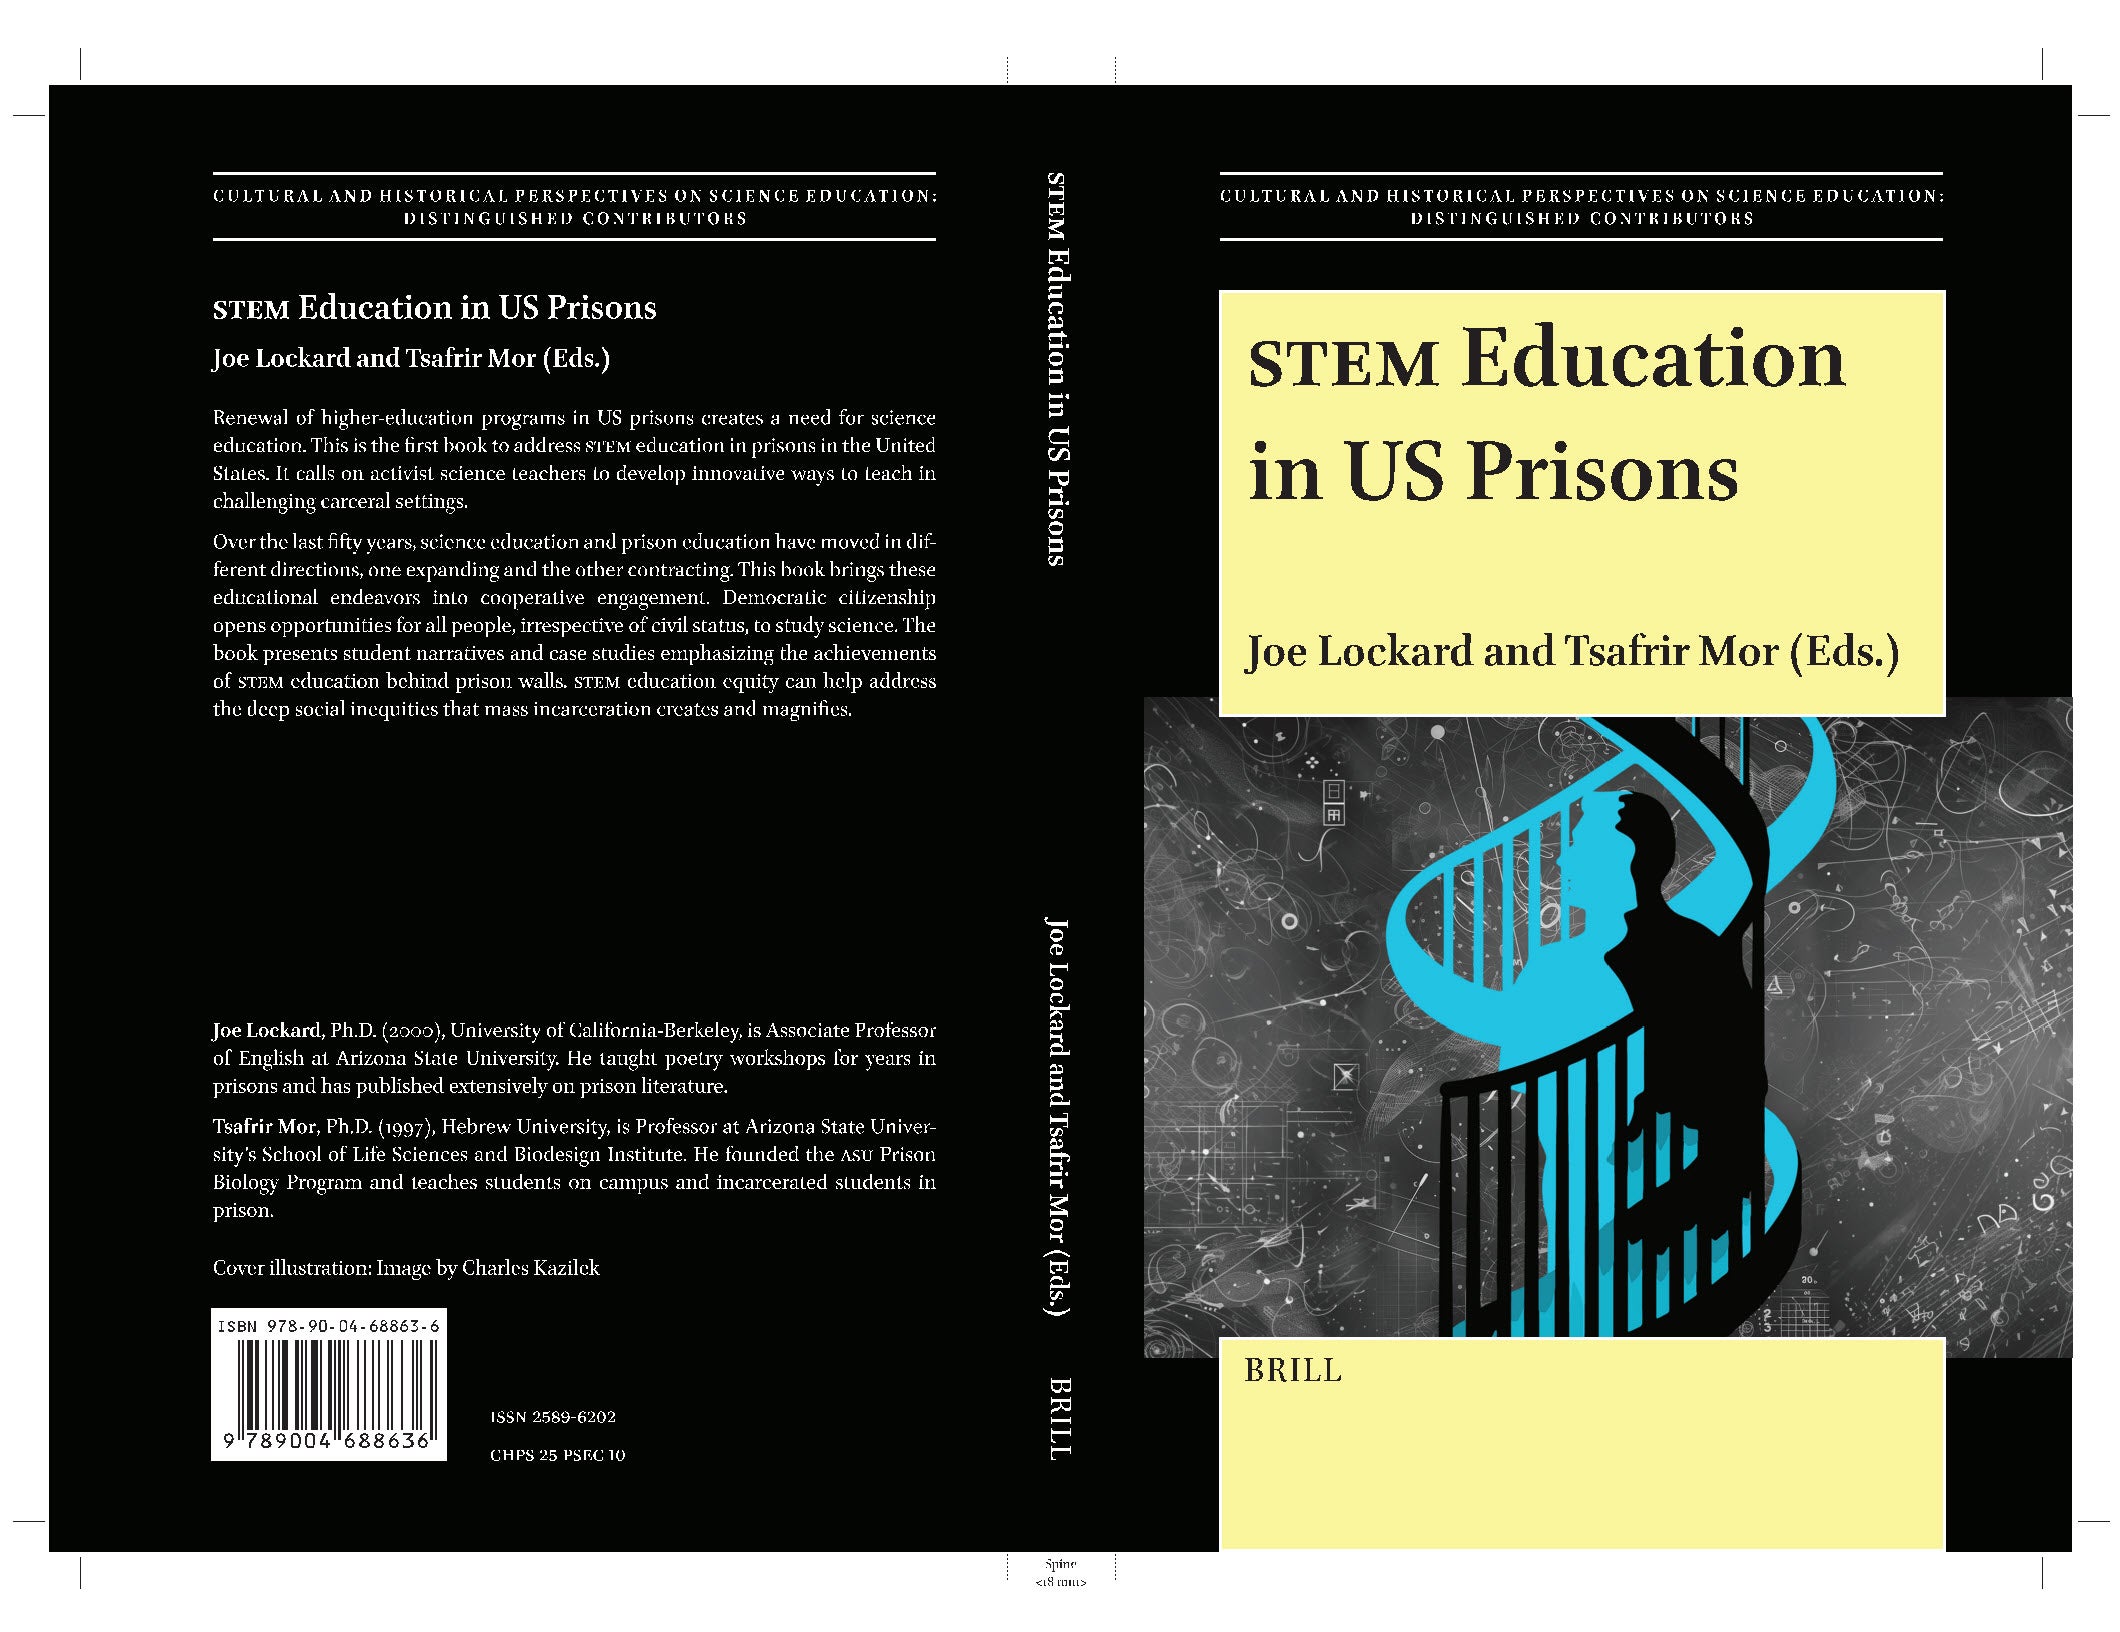 Cover of STEM Education in US Prisons book